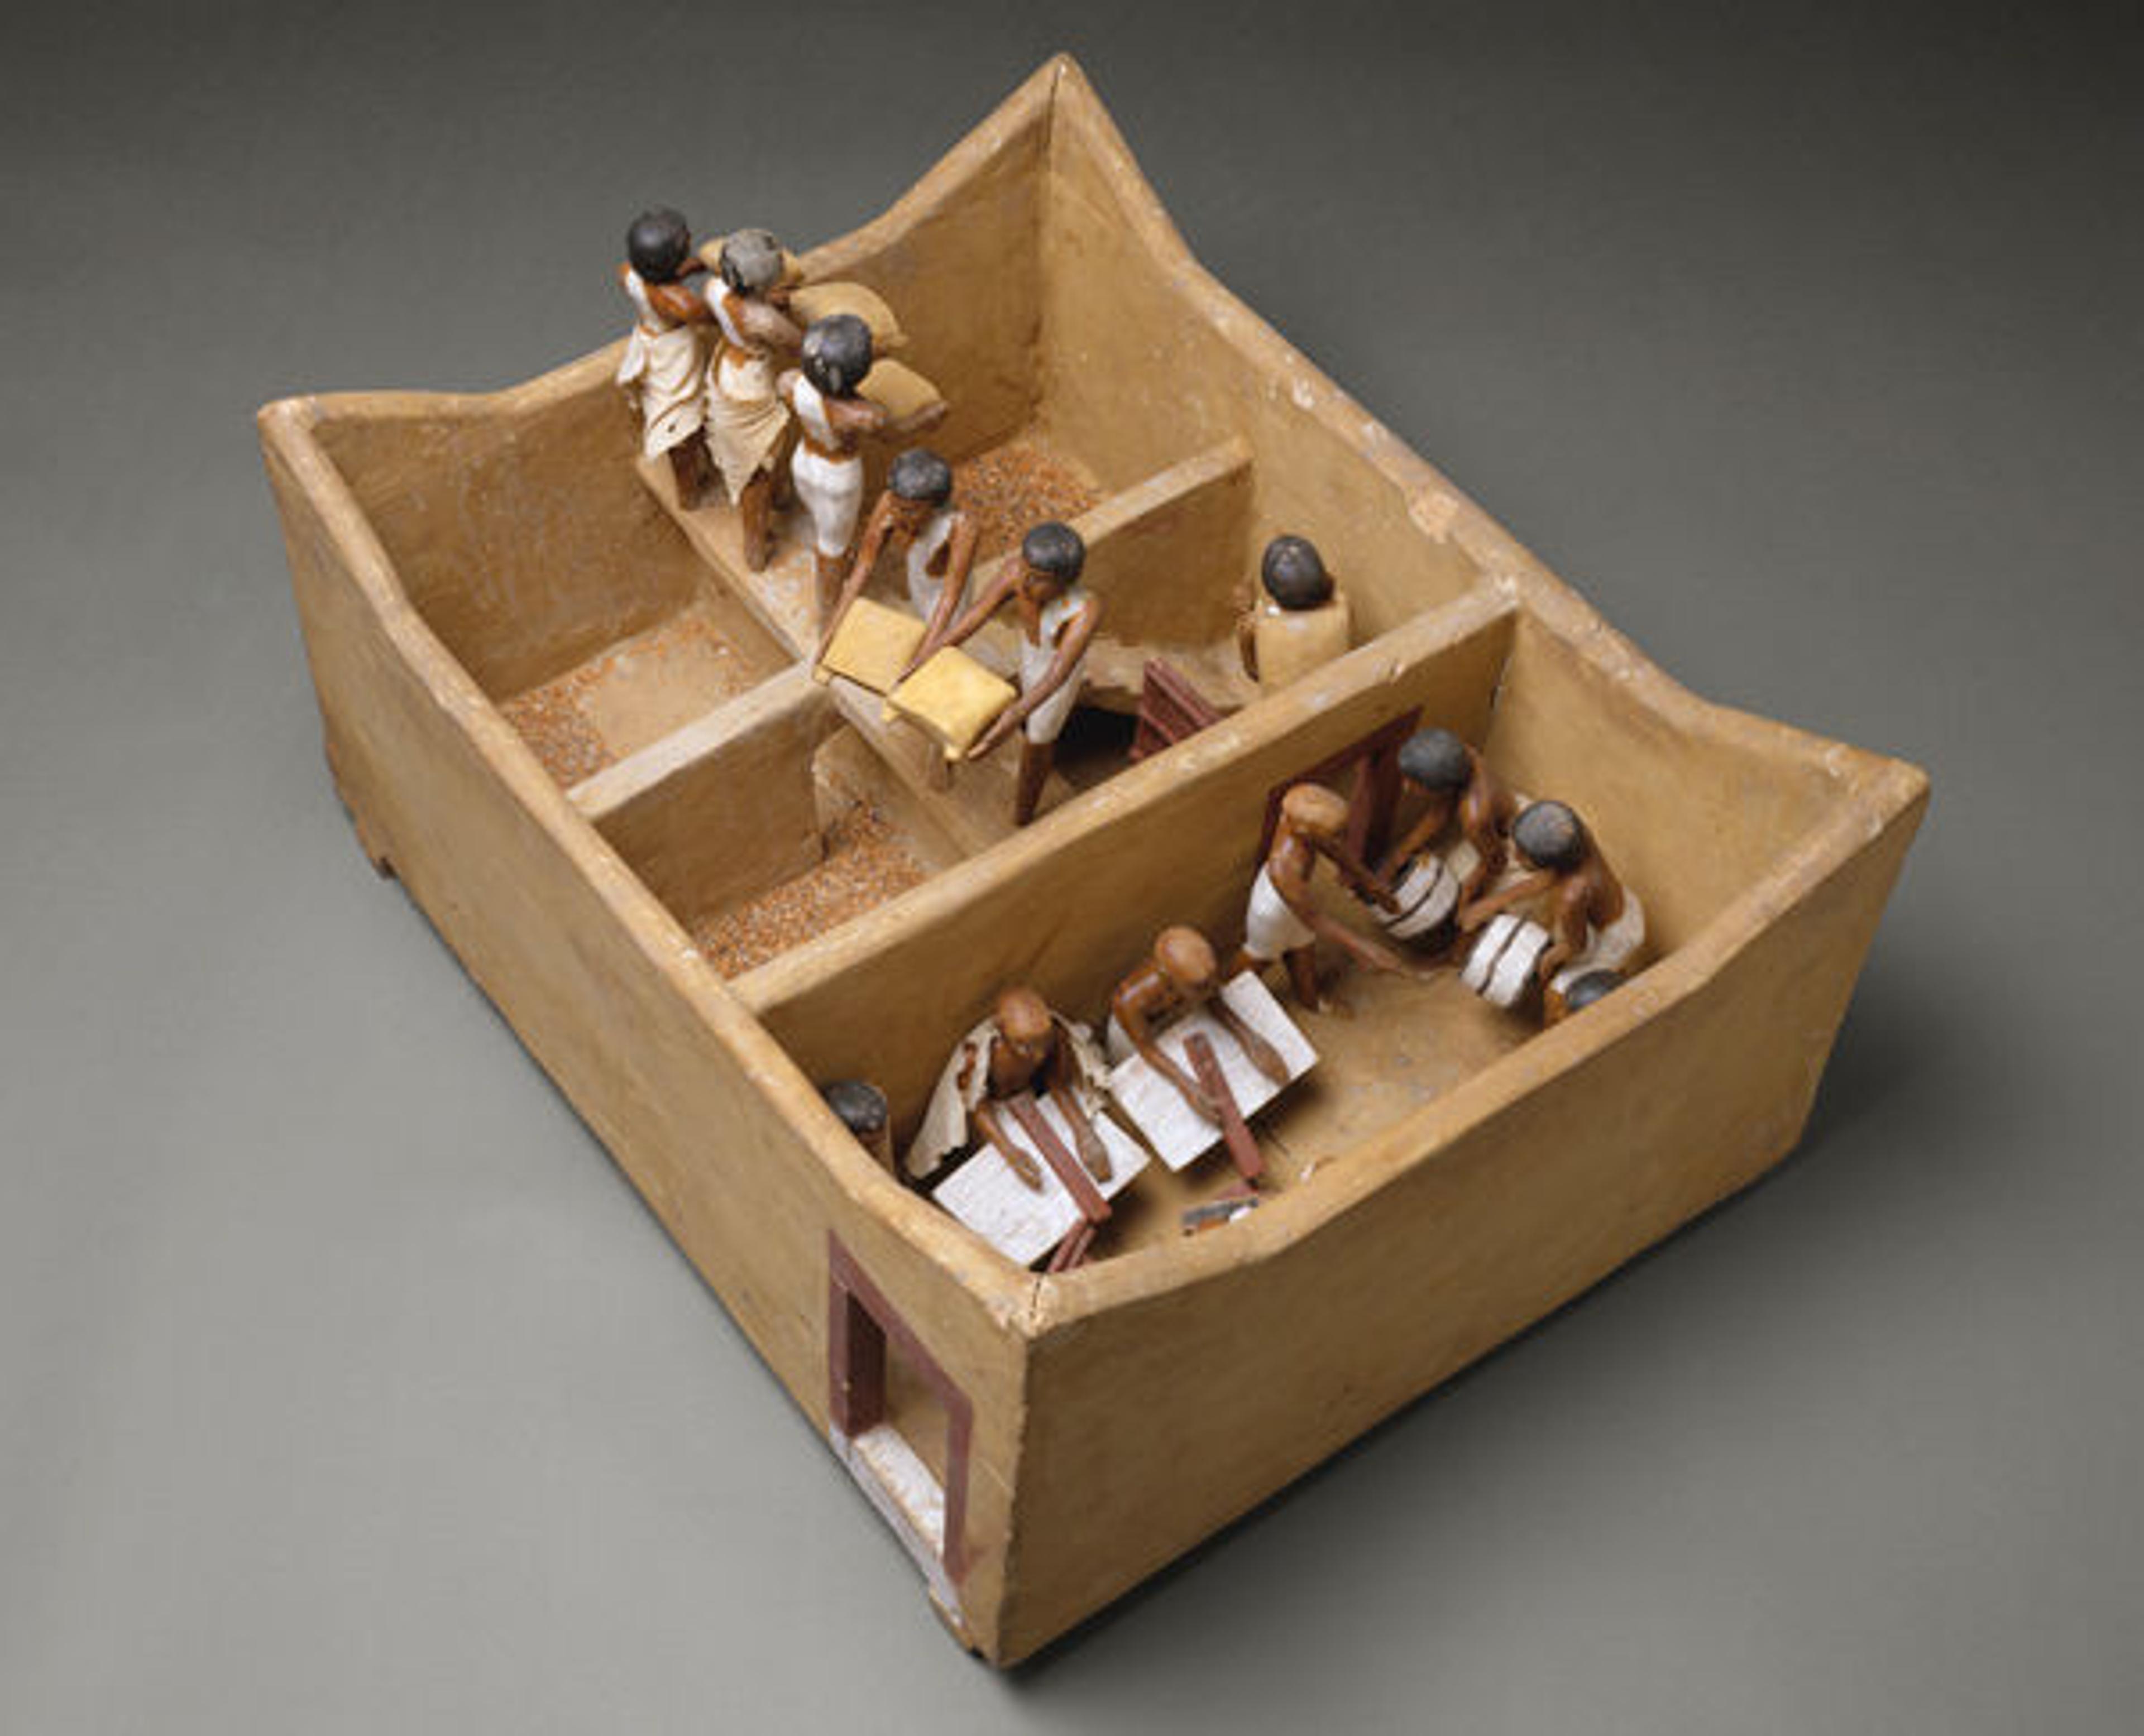 Model of a Granary with Scribes. Middle Kingdom, Dynasty 12, early reign of Amenemhat I (ca. 1981–1975 B.C.). Wood, plaster, paint, linen, grain; L. 74.9 (29 1/2 in.), W. 56 cm (22 1/16 in.), H. 36.5 (14 3/8 in.), average height of figures: 20 cm (7 7/8 in.). The Metropolitan Museum of Art, New York, Rogers Fund and Edward S. Harkness Gift, 1920 (20.3.11)